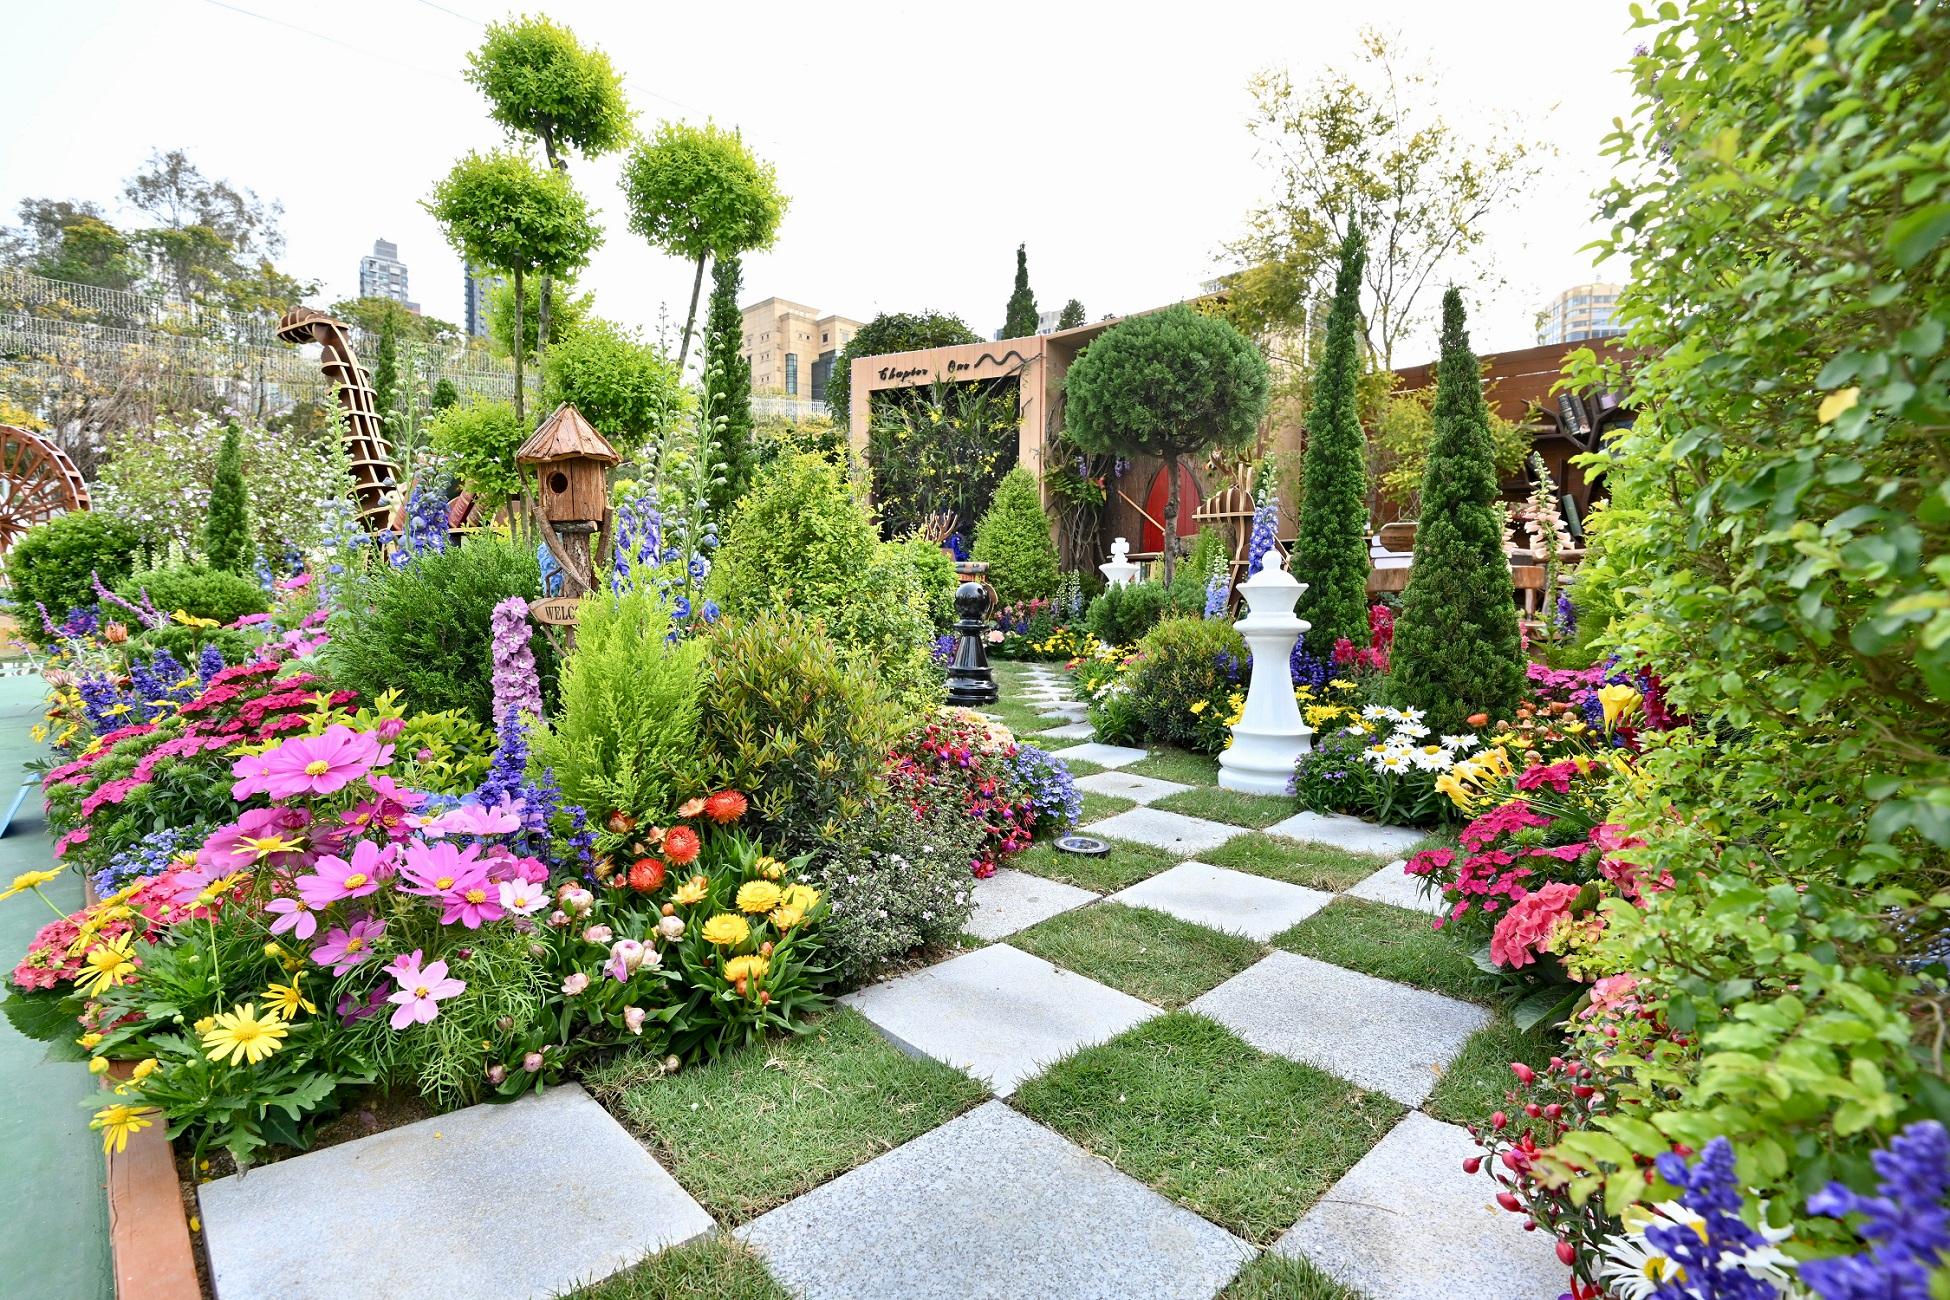 The winners of the plant exhibit competition, which is one of the major activities of the Hong Kong Flower Show, were announced today (March 11). Photo shows the winning garden plot of the Leisure and Cultural Services Department Western Style Garden Plot Competition.

